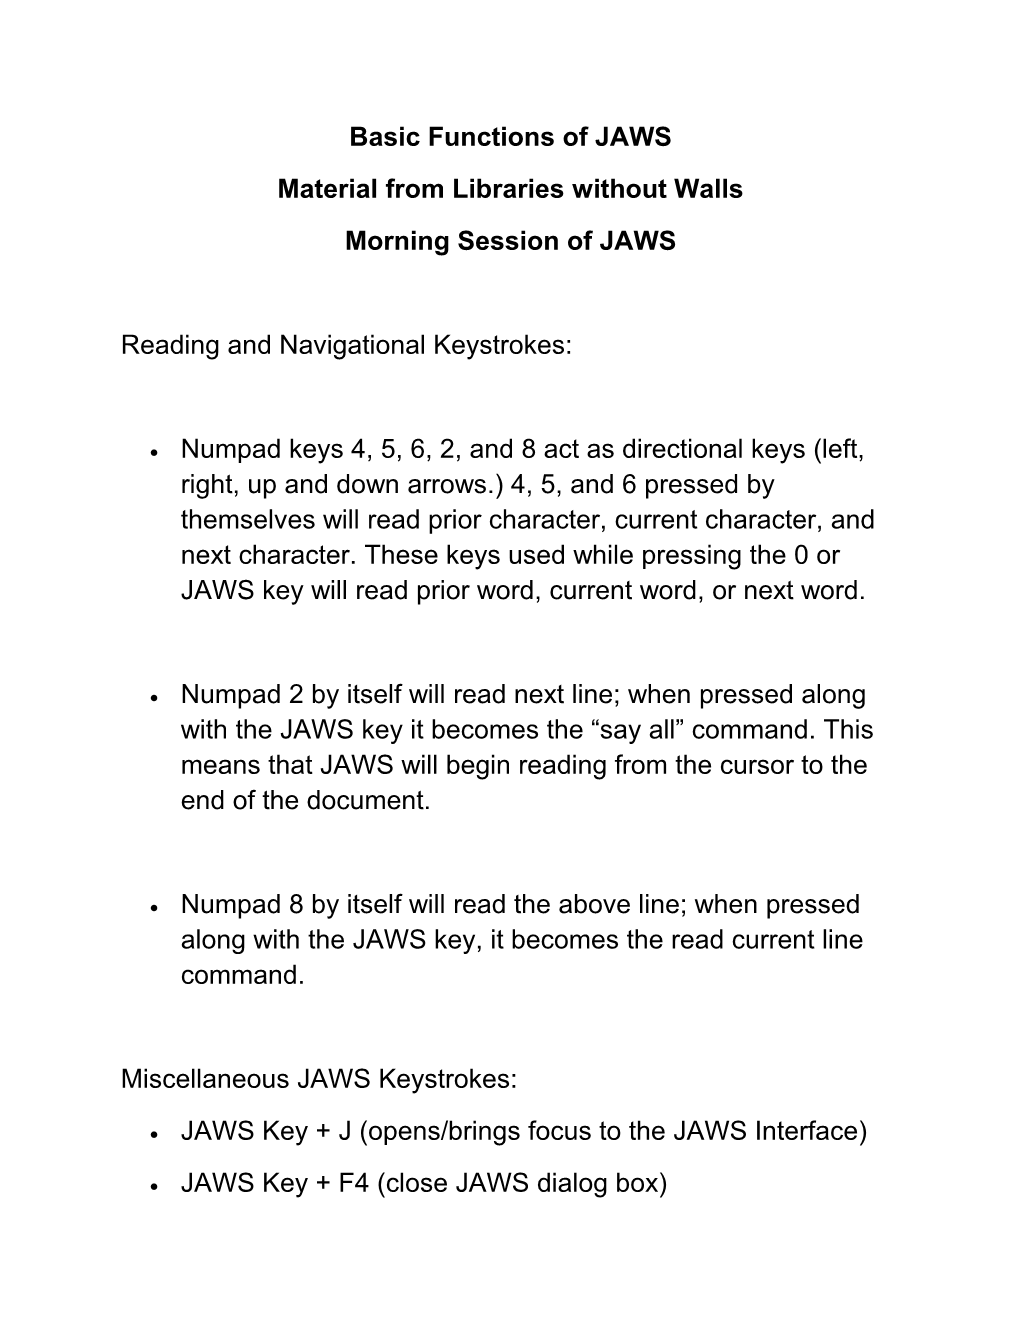 Material from Libraries Without Walls